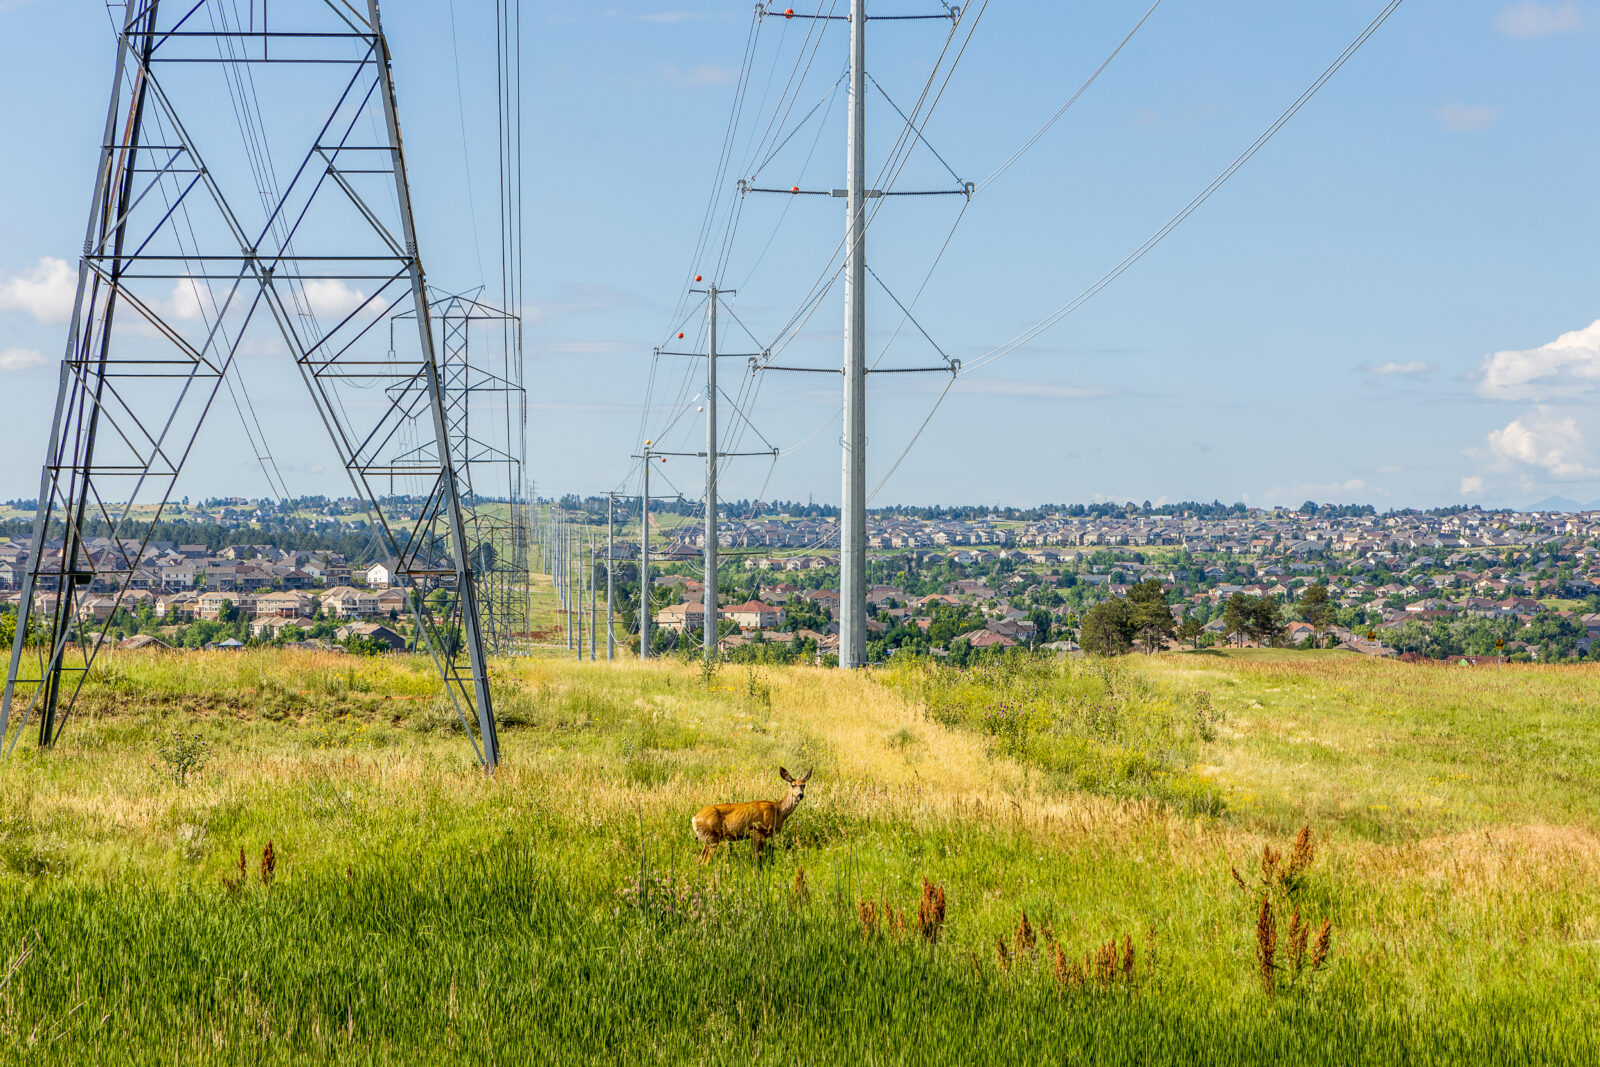 A deer grazes in a meadow among transmission lines.